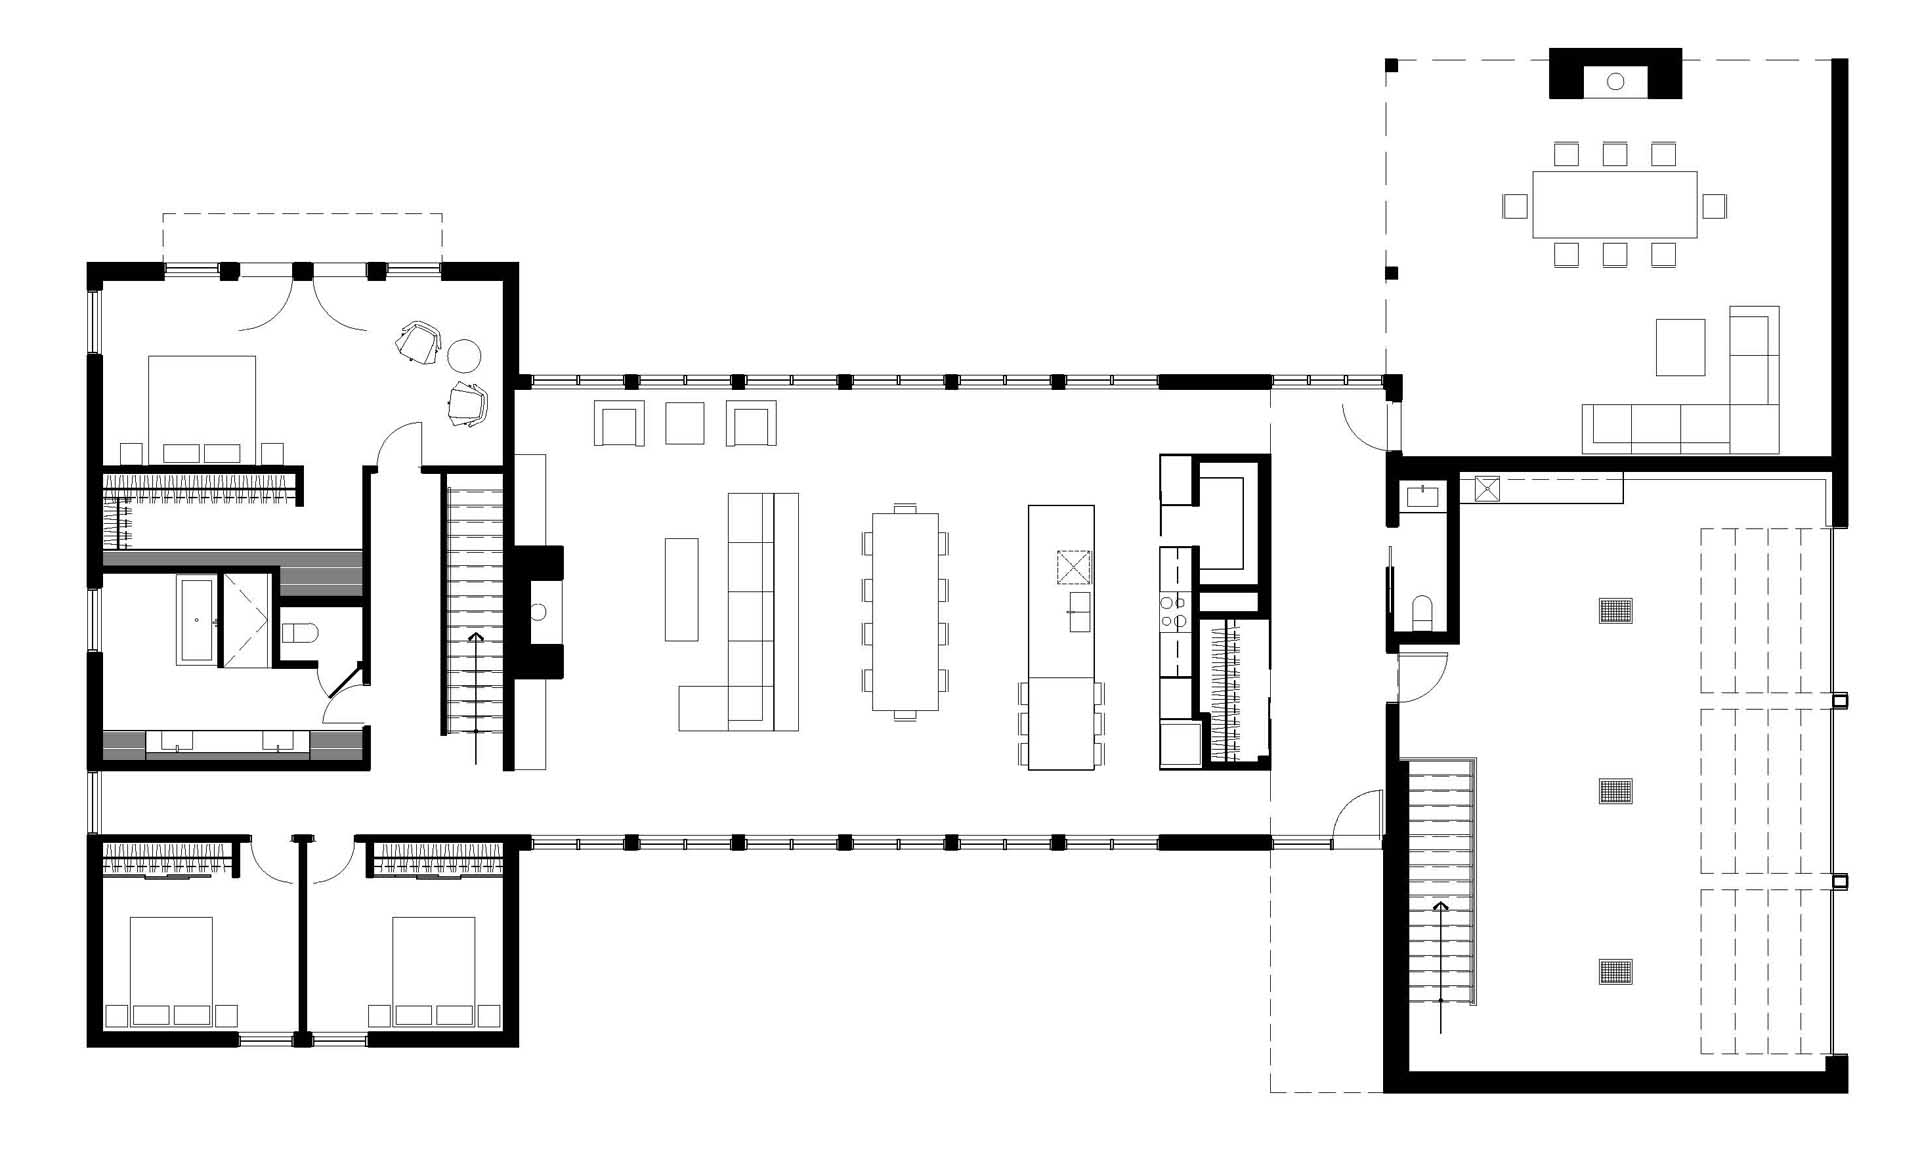 The first floor plan of a contemporary home.